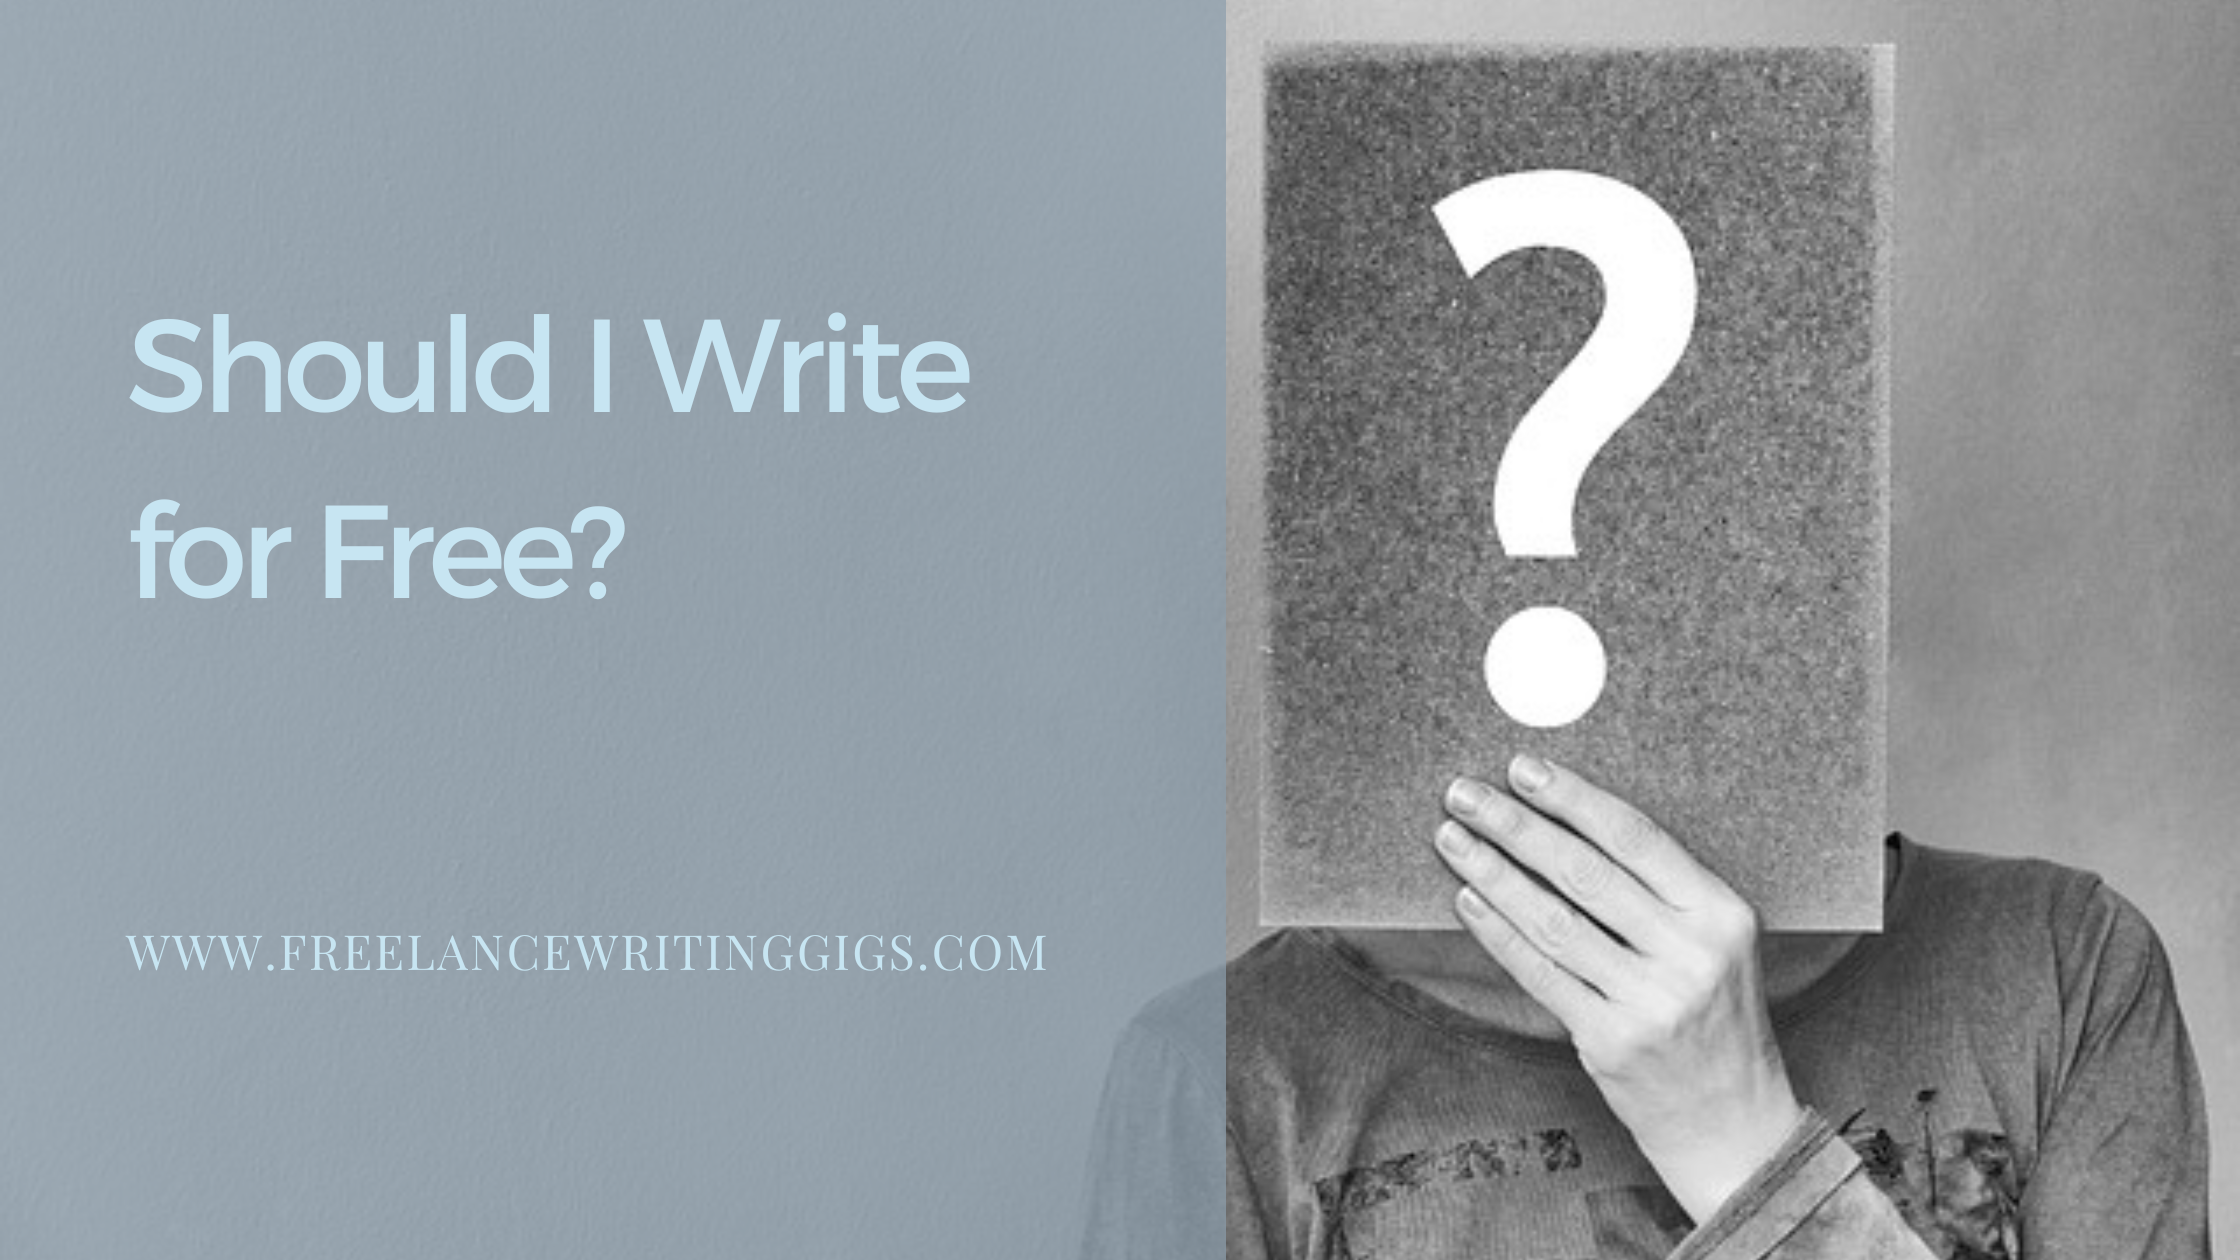 Should I Write for Free?